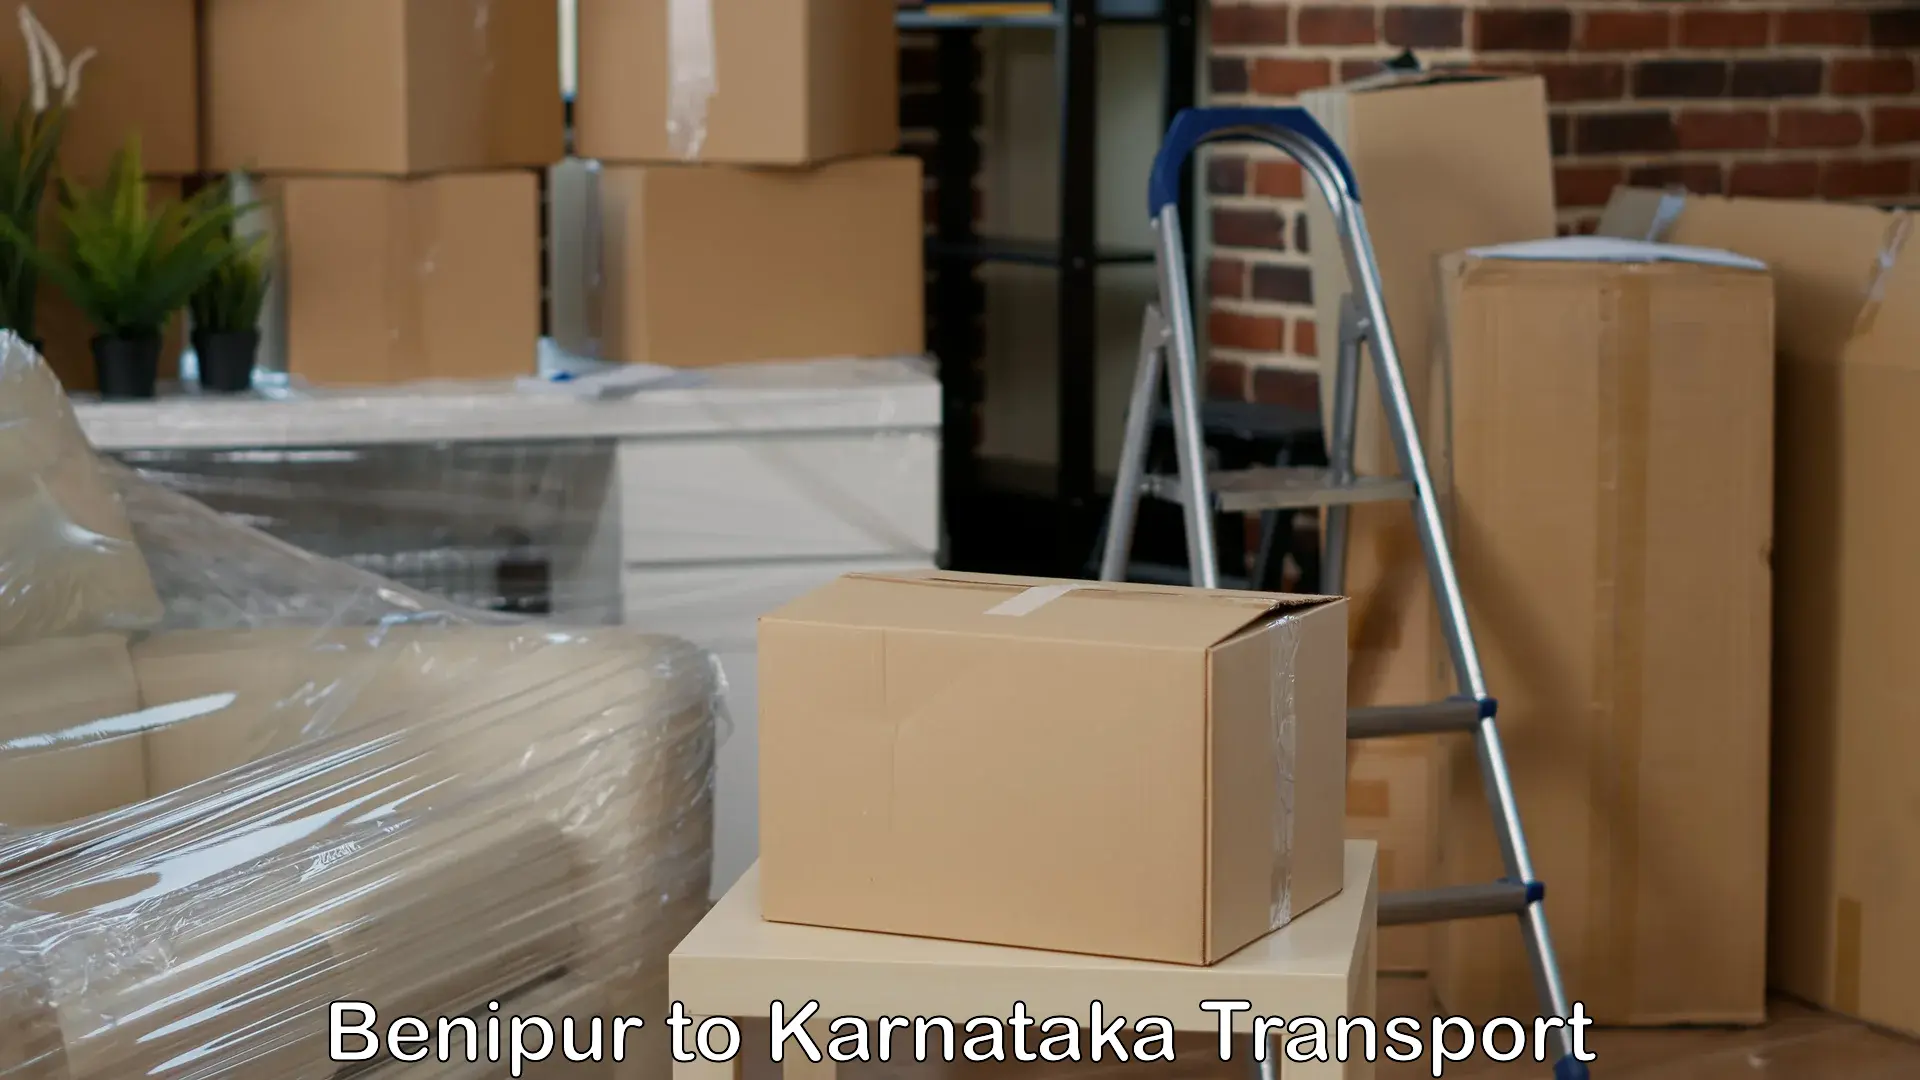 Package delivery services in Benipur to Bangalore